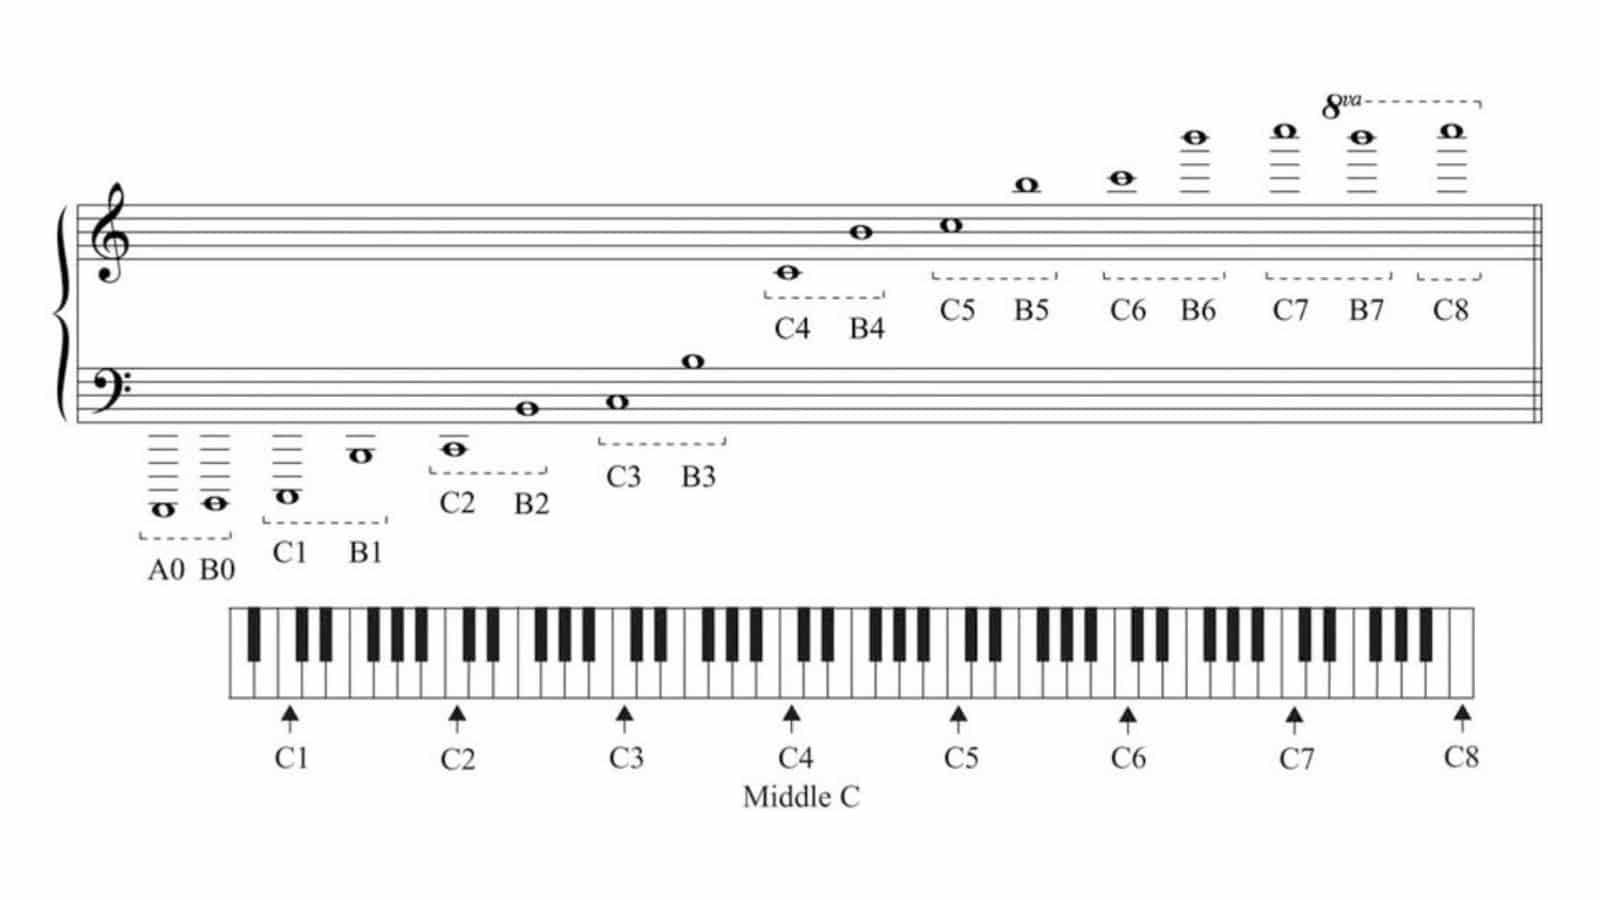 Octave division and the corresponding notes